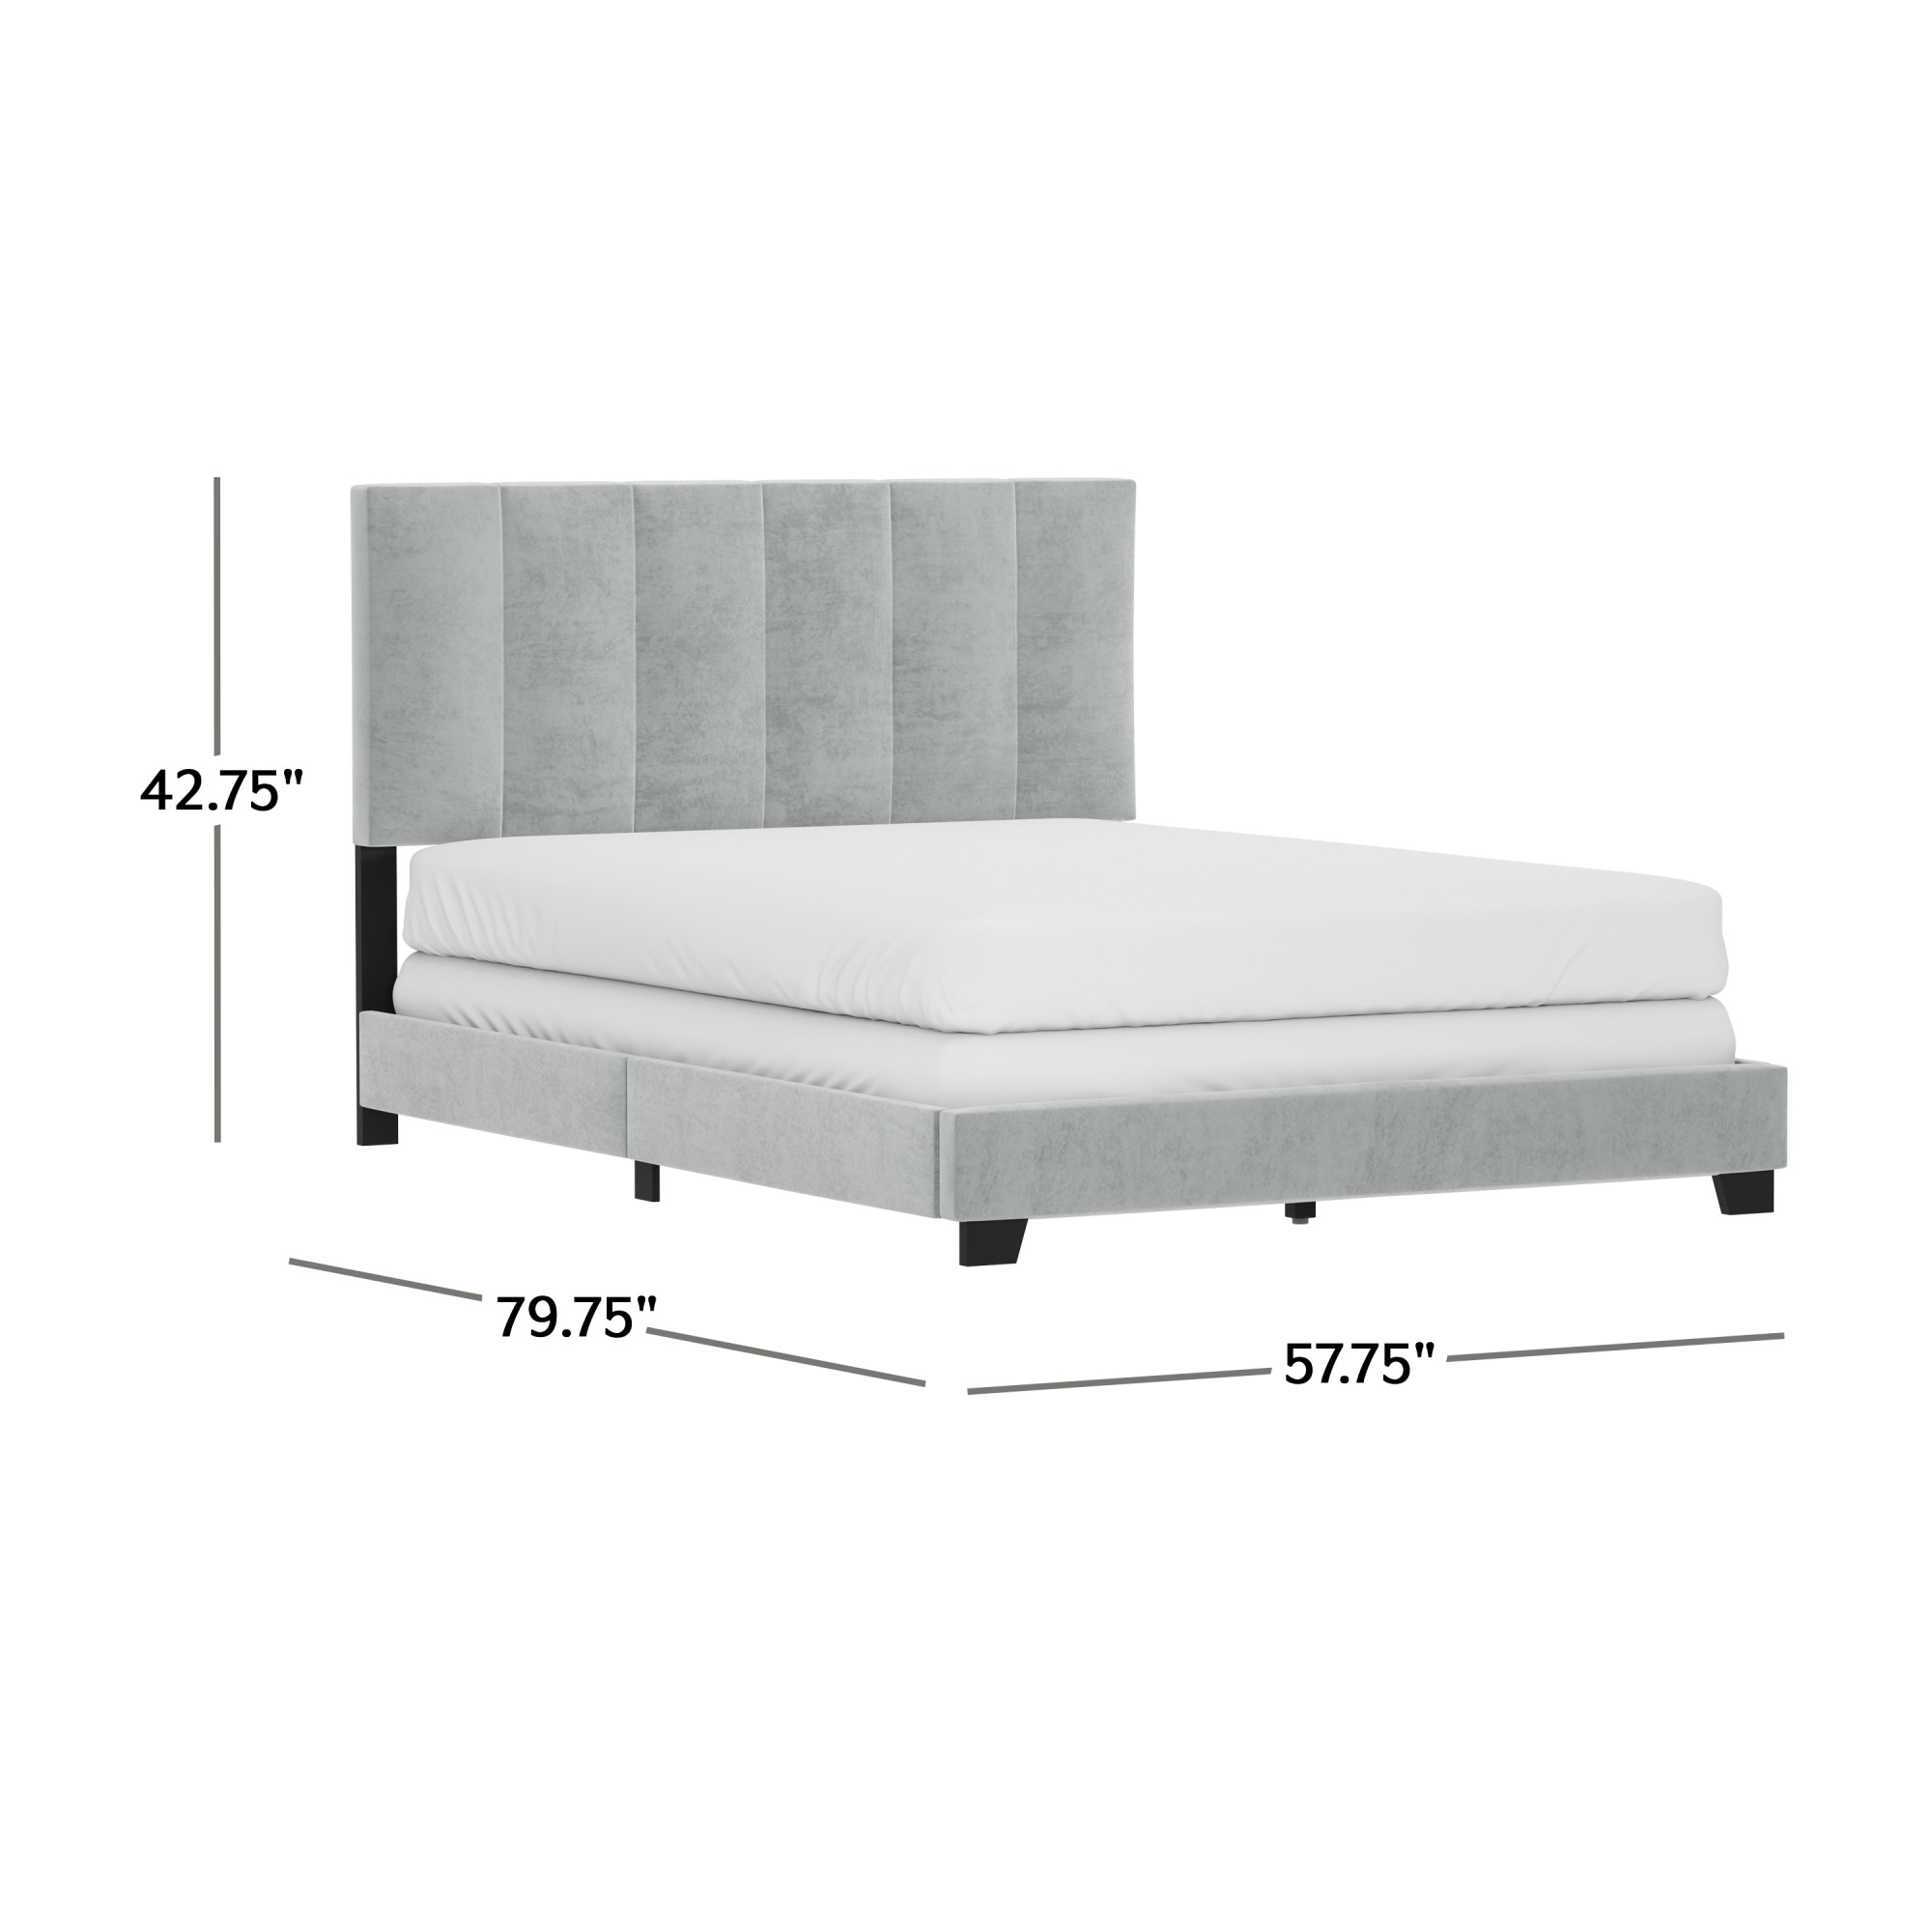 Reece Channel Stitched Upholstered Full Bed, Platinum Grey, by Hillsdale Living Essentials - image 5 of 17